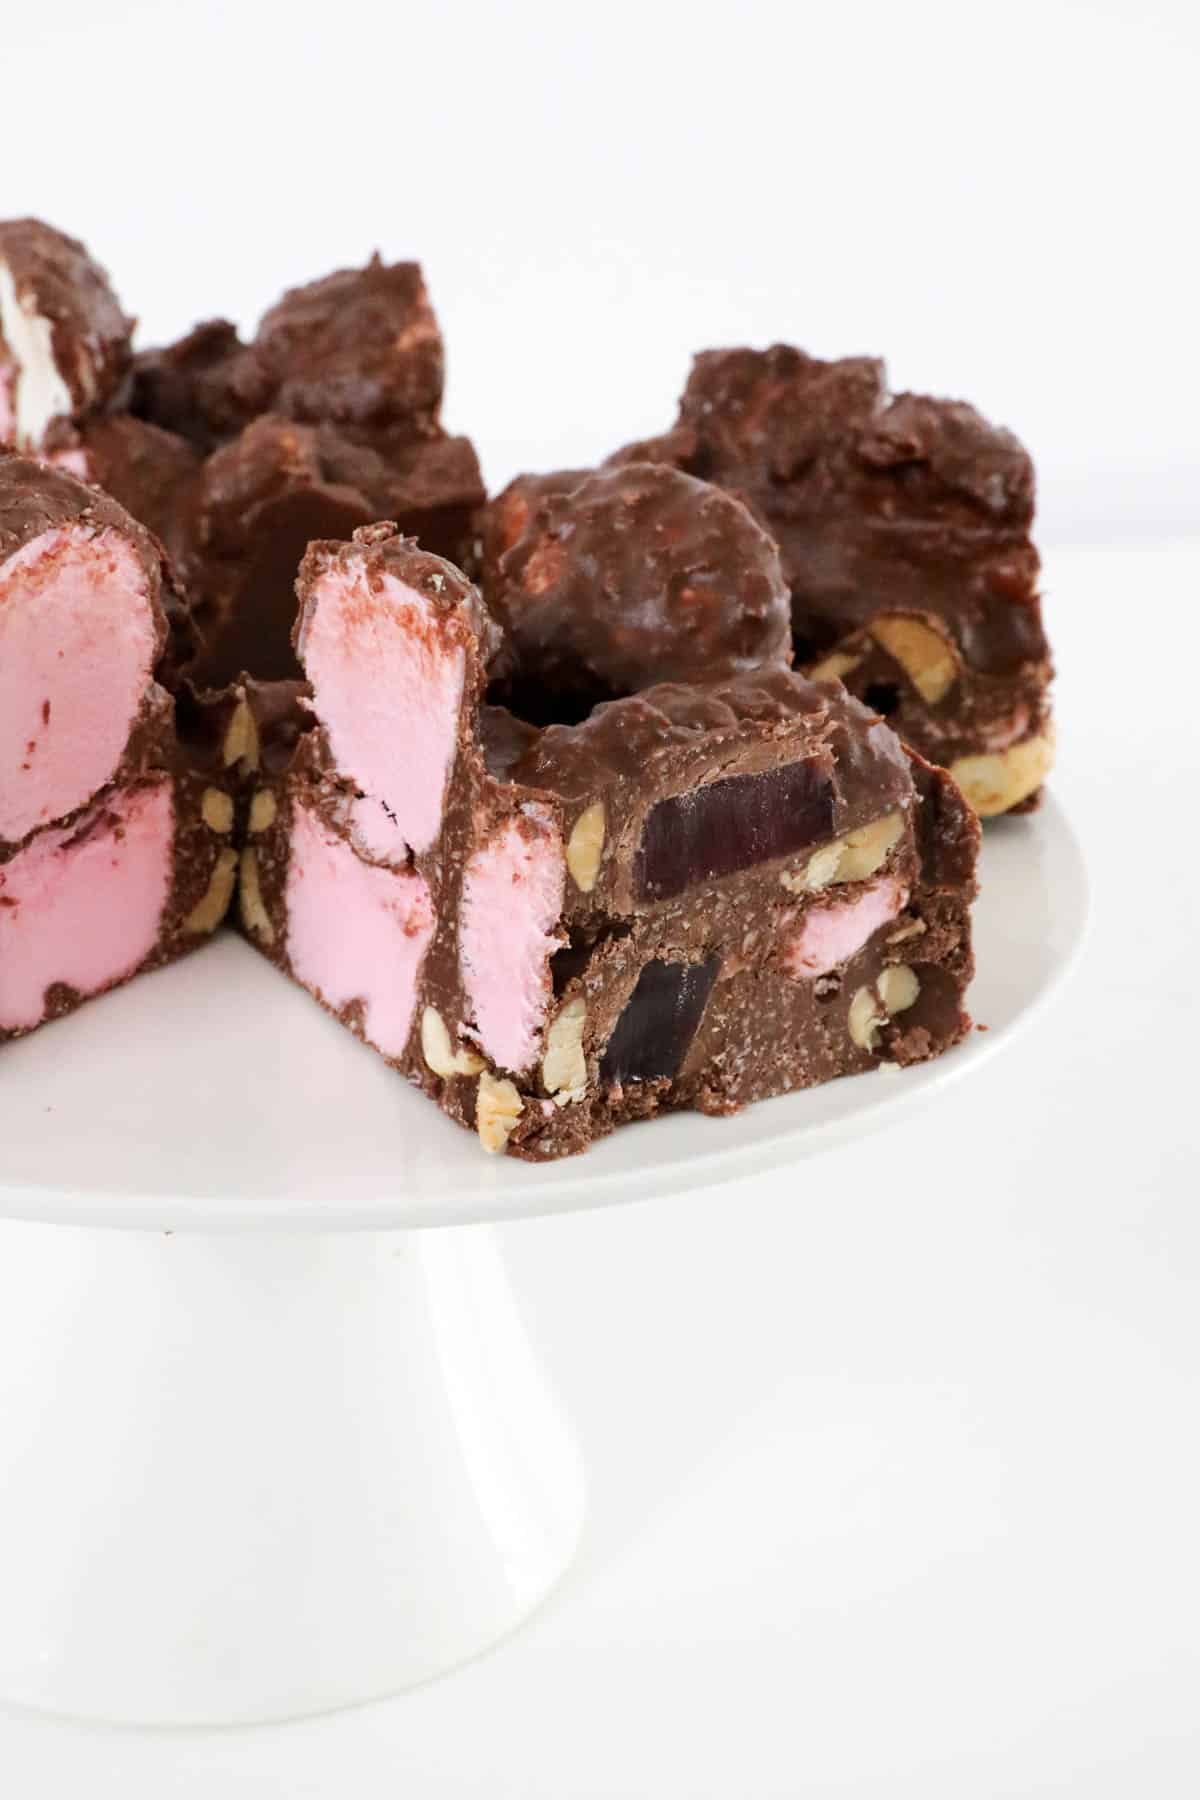 Pieces of rocky road on a cake stand.